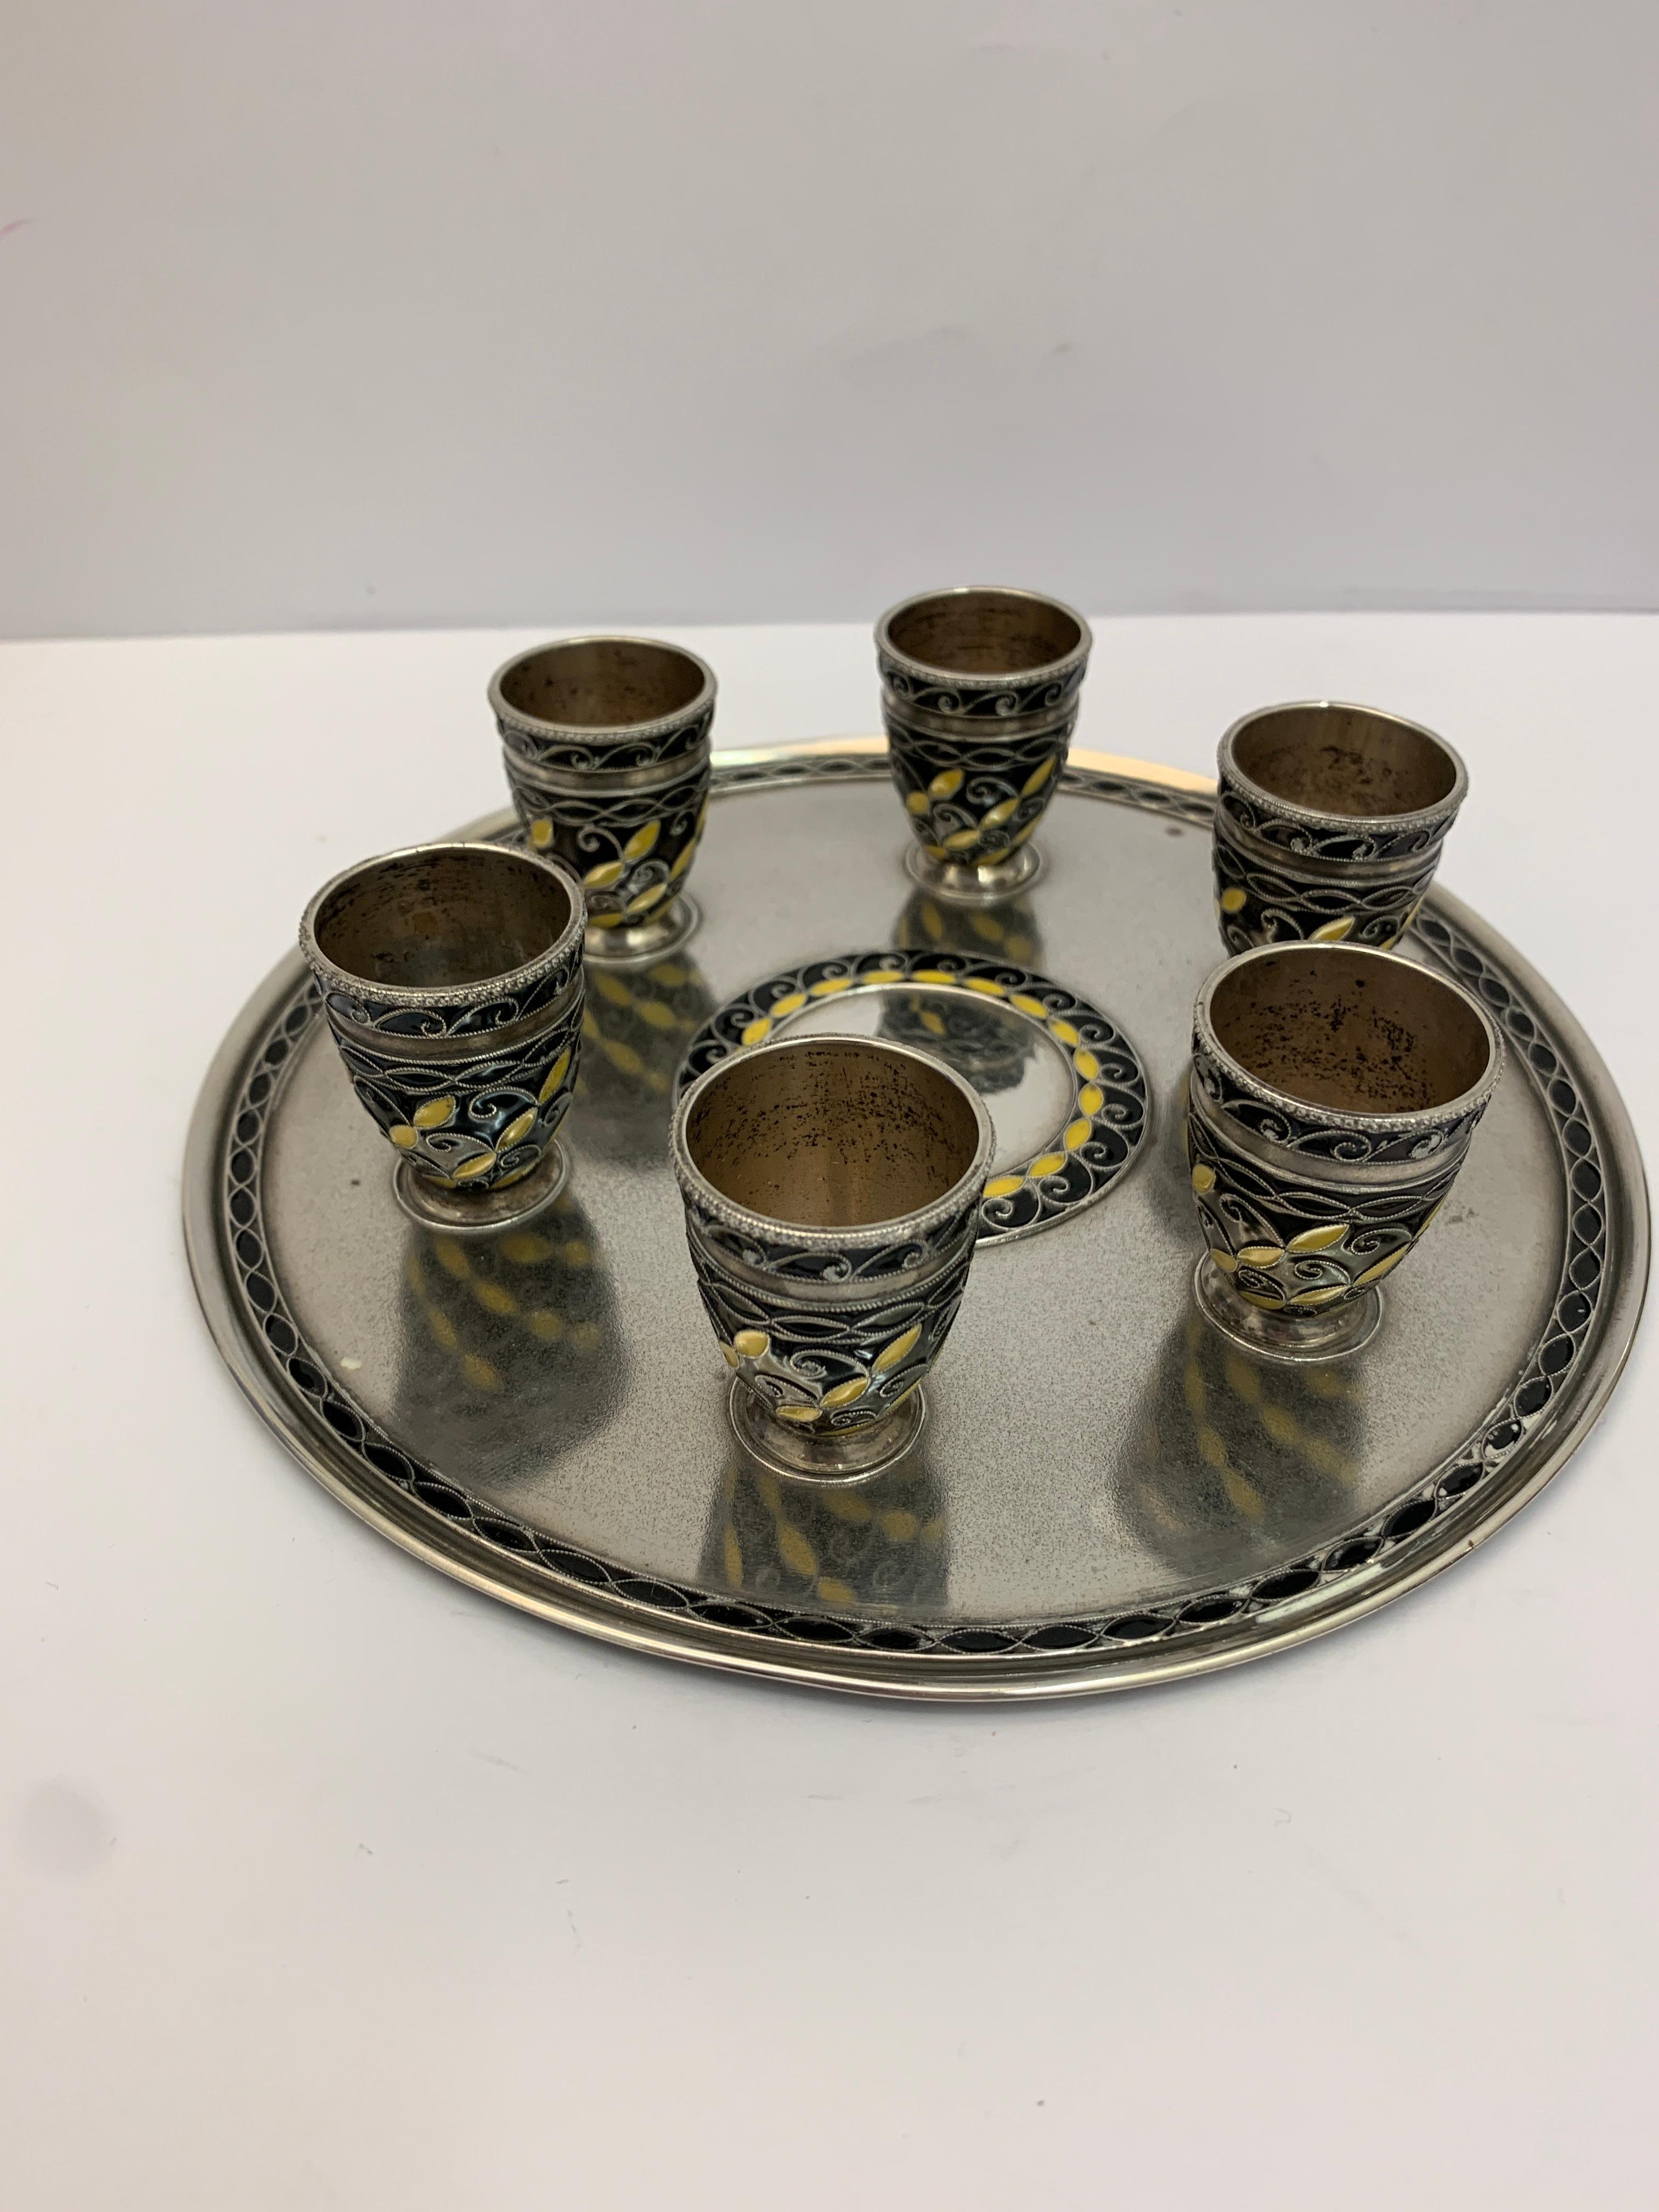 A Russian silver and enamel drinking set, including 6 small drinking/shot tumblers and large silver ewer. All intricately decorated upon a circular silver tray.